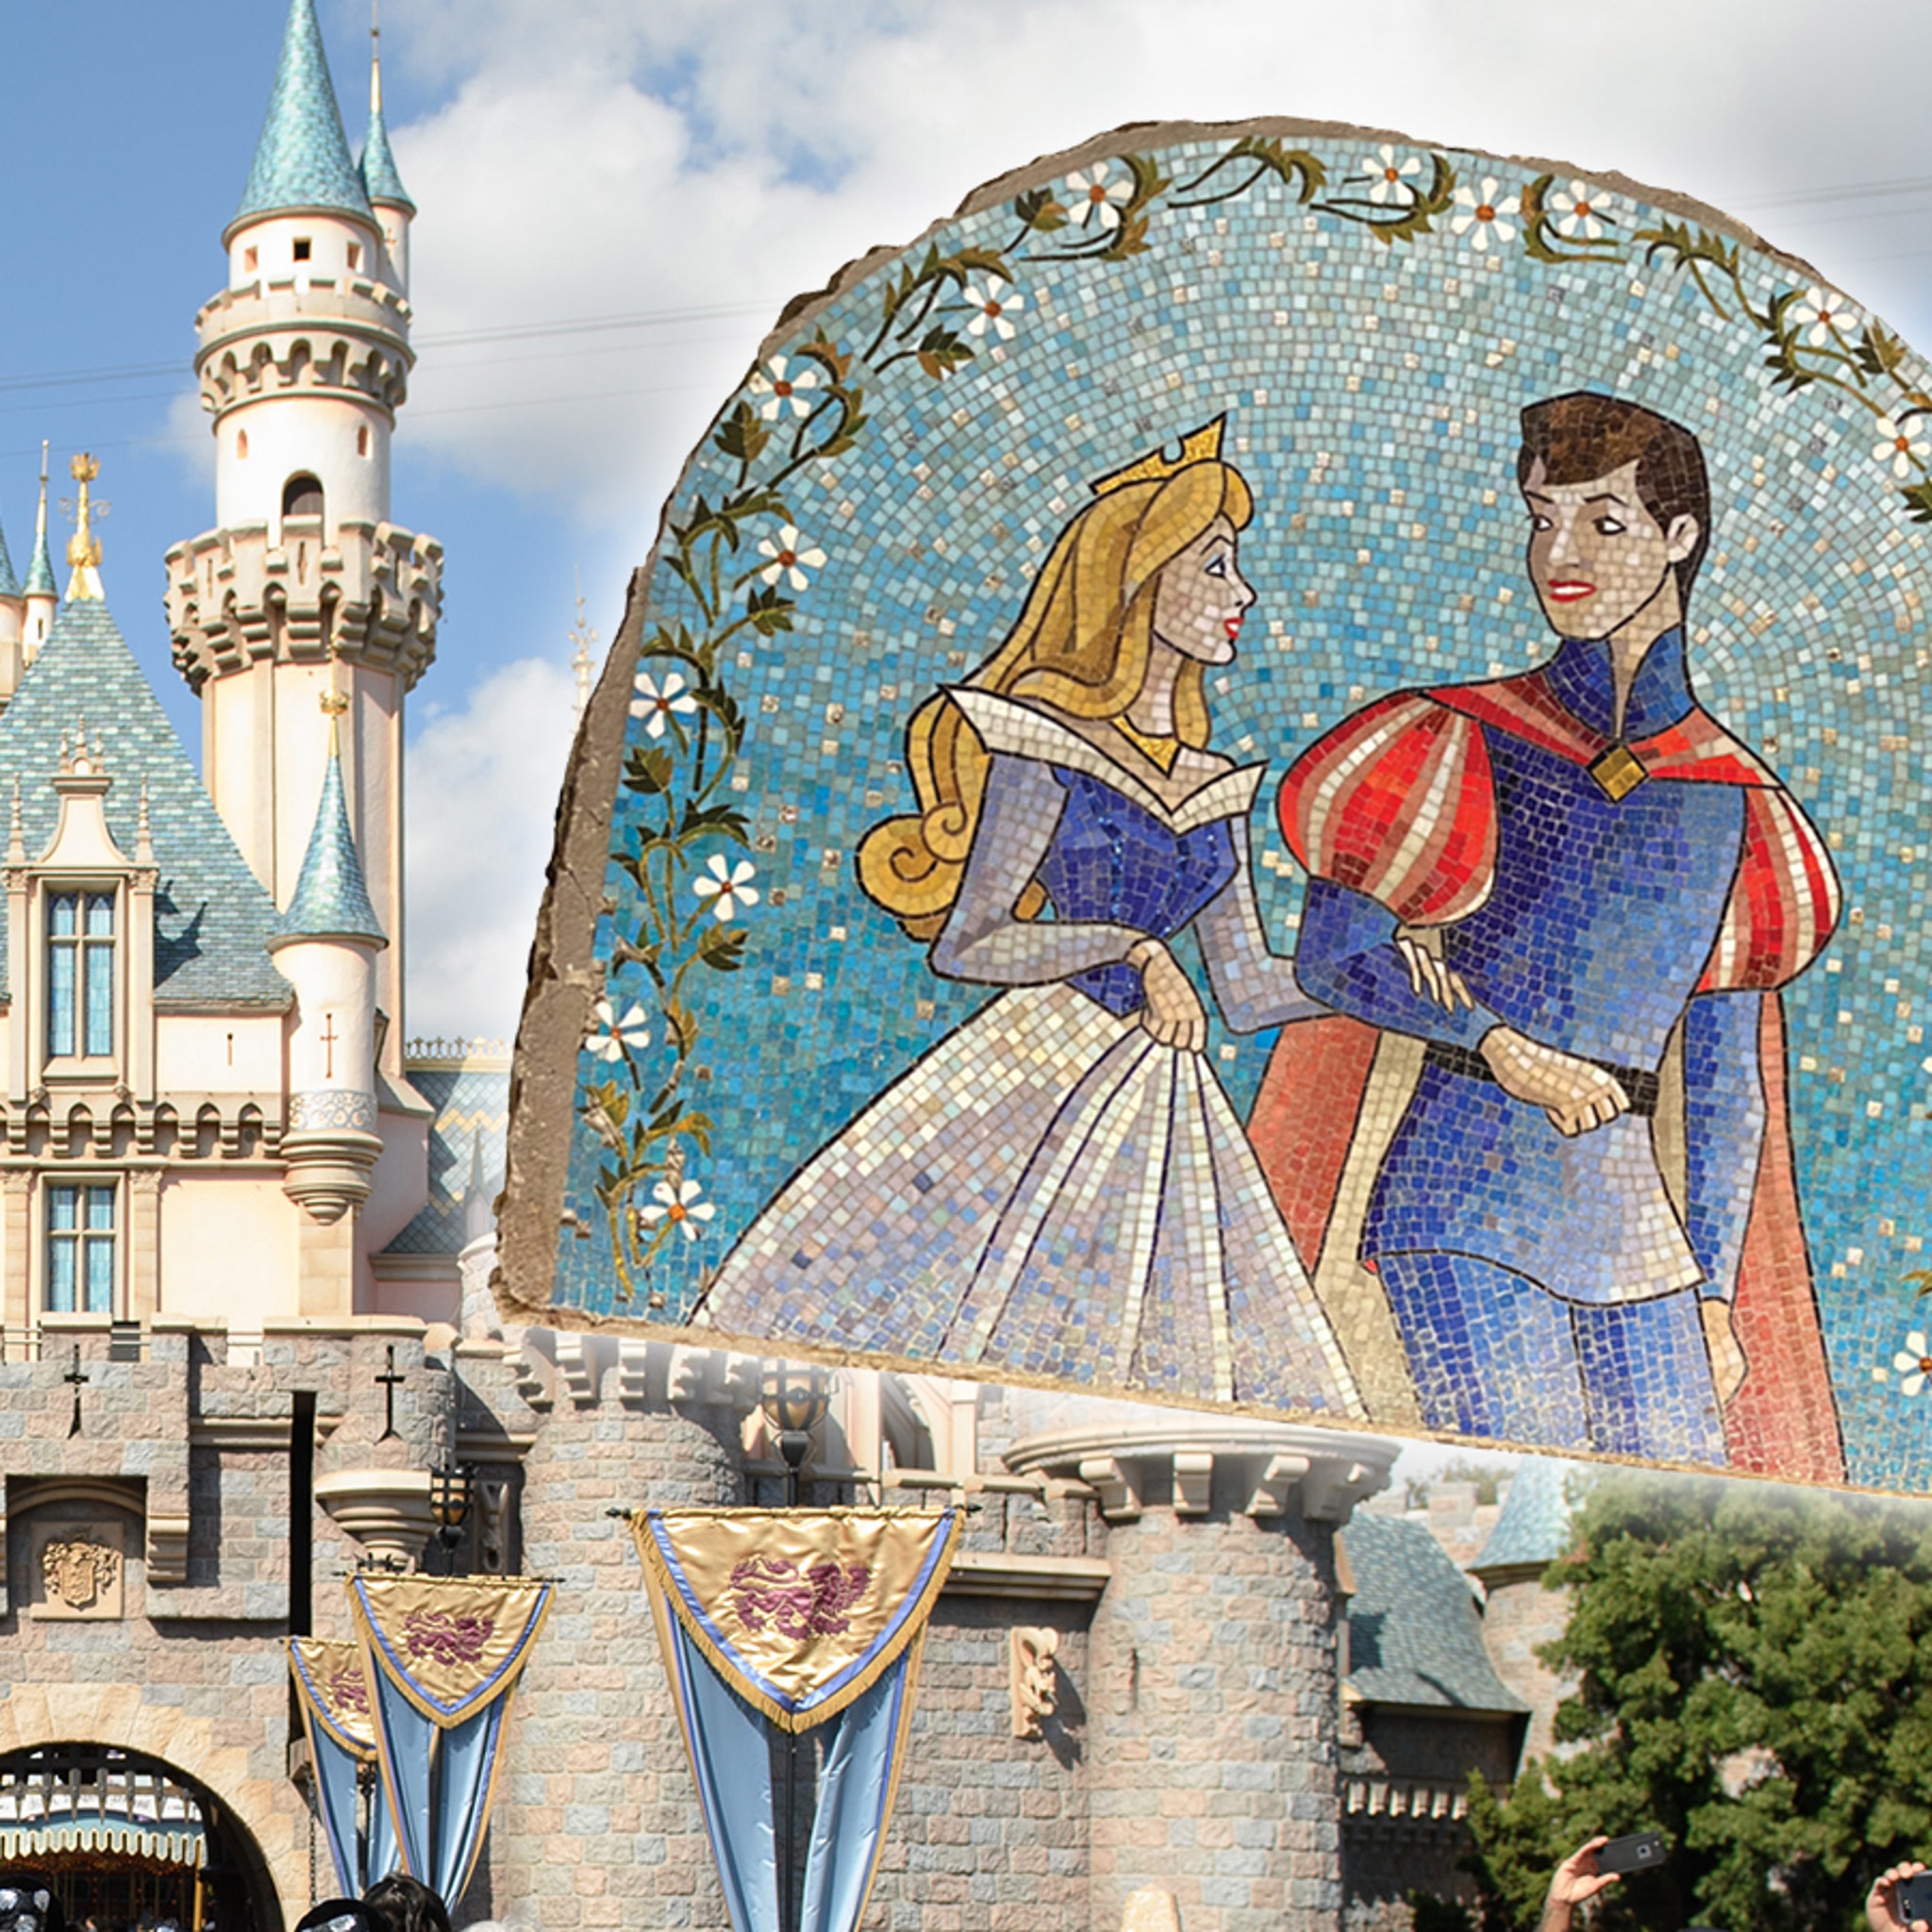 More of Sleeping Beauty Castle Revealed at Disneyland Paris as  Refurbishment Continues – Mousesteps